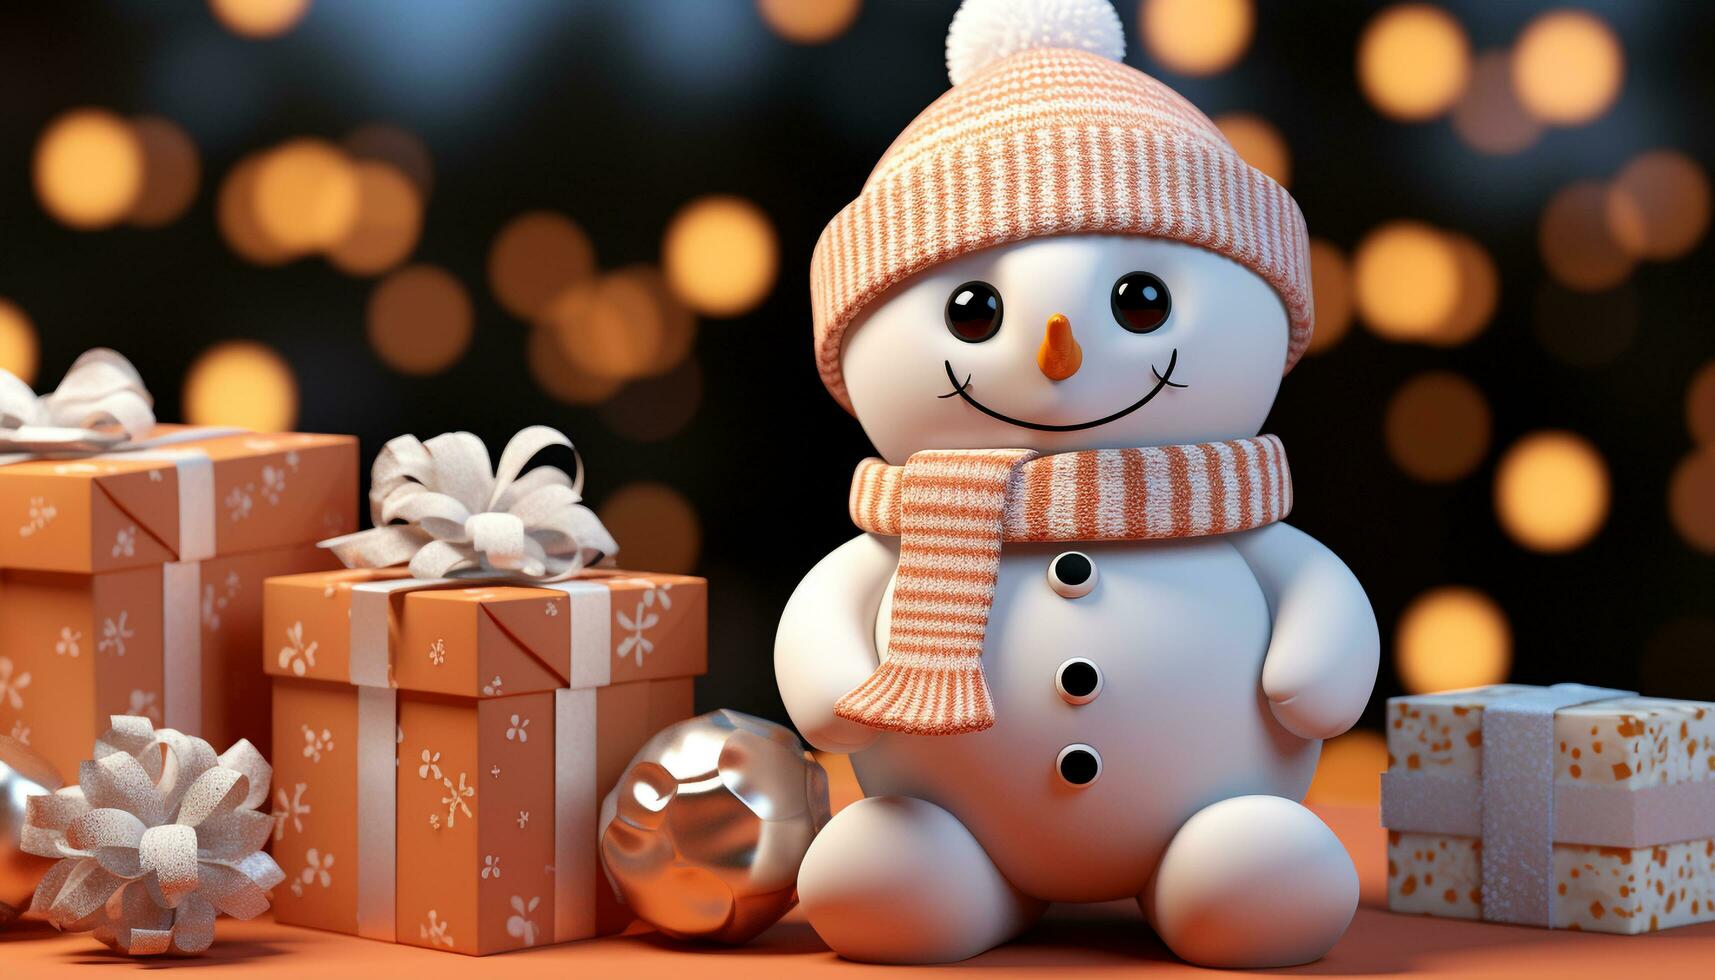 AI generated Cute snowman decoration brings joy to winter celebration generated by AI photo